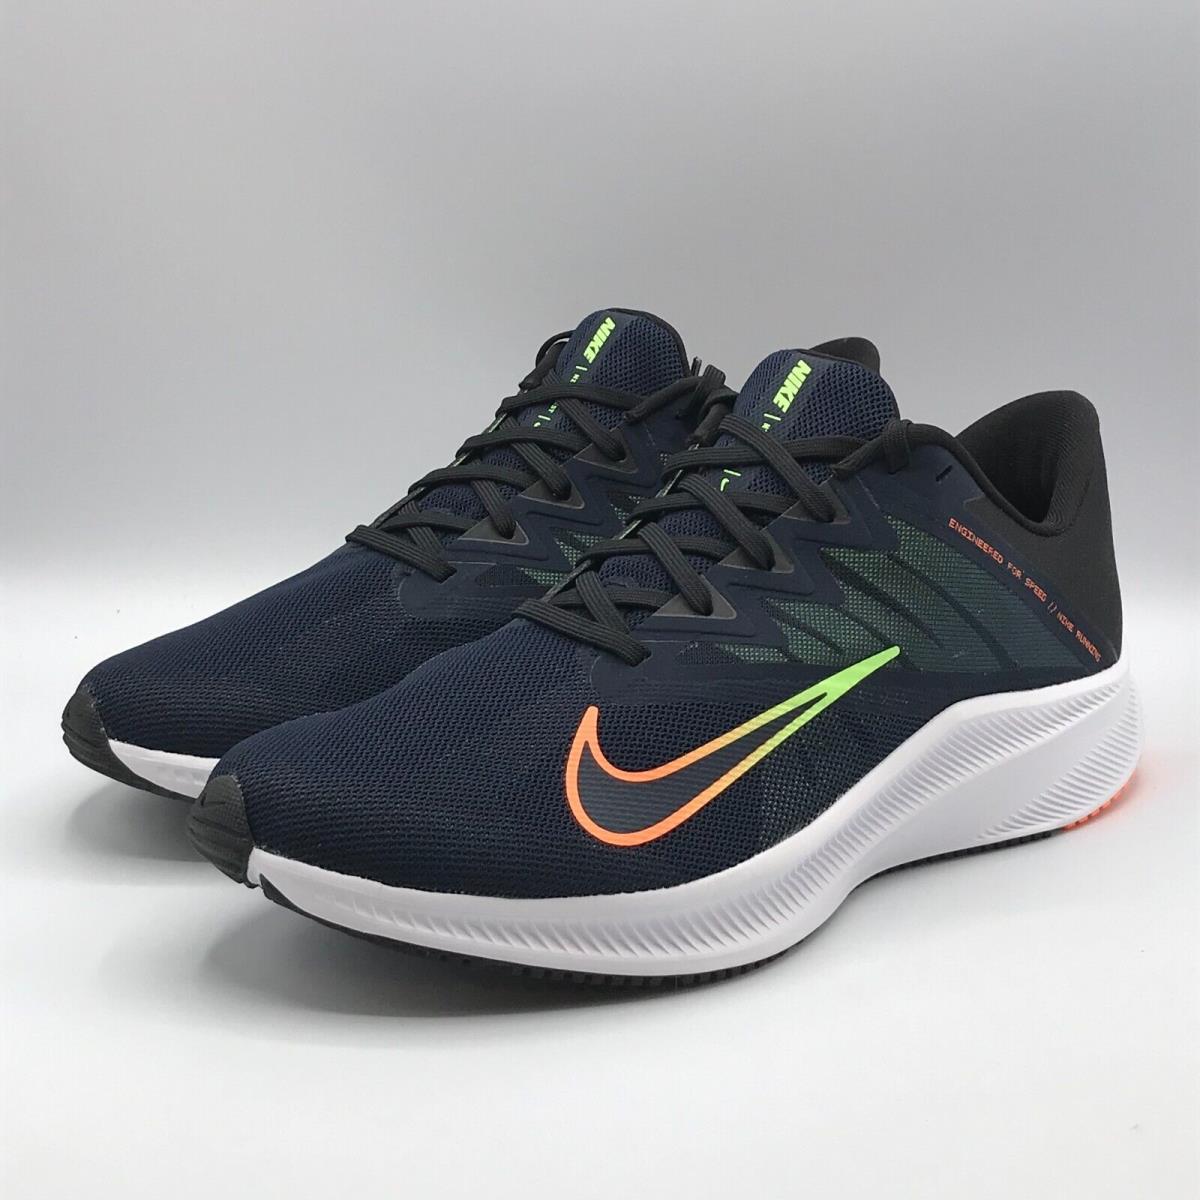 Nike Quest 3 Shoes Mens Size 11.5 Obsidian Blue Atomic Orange Running Sneakers